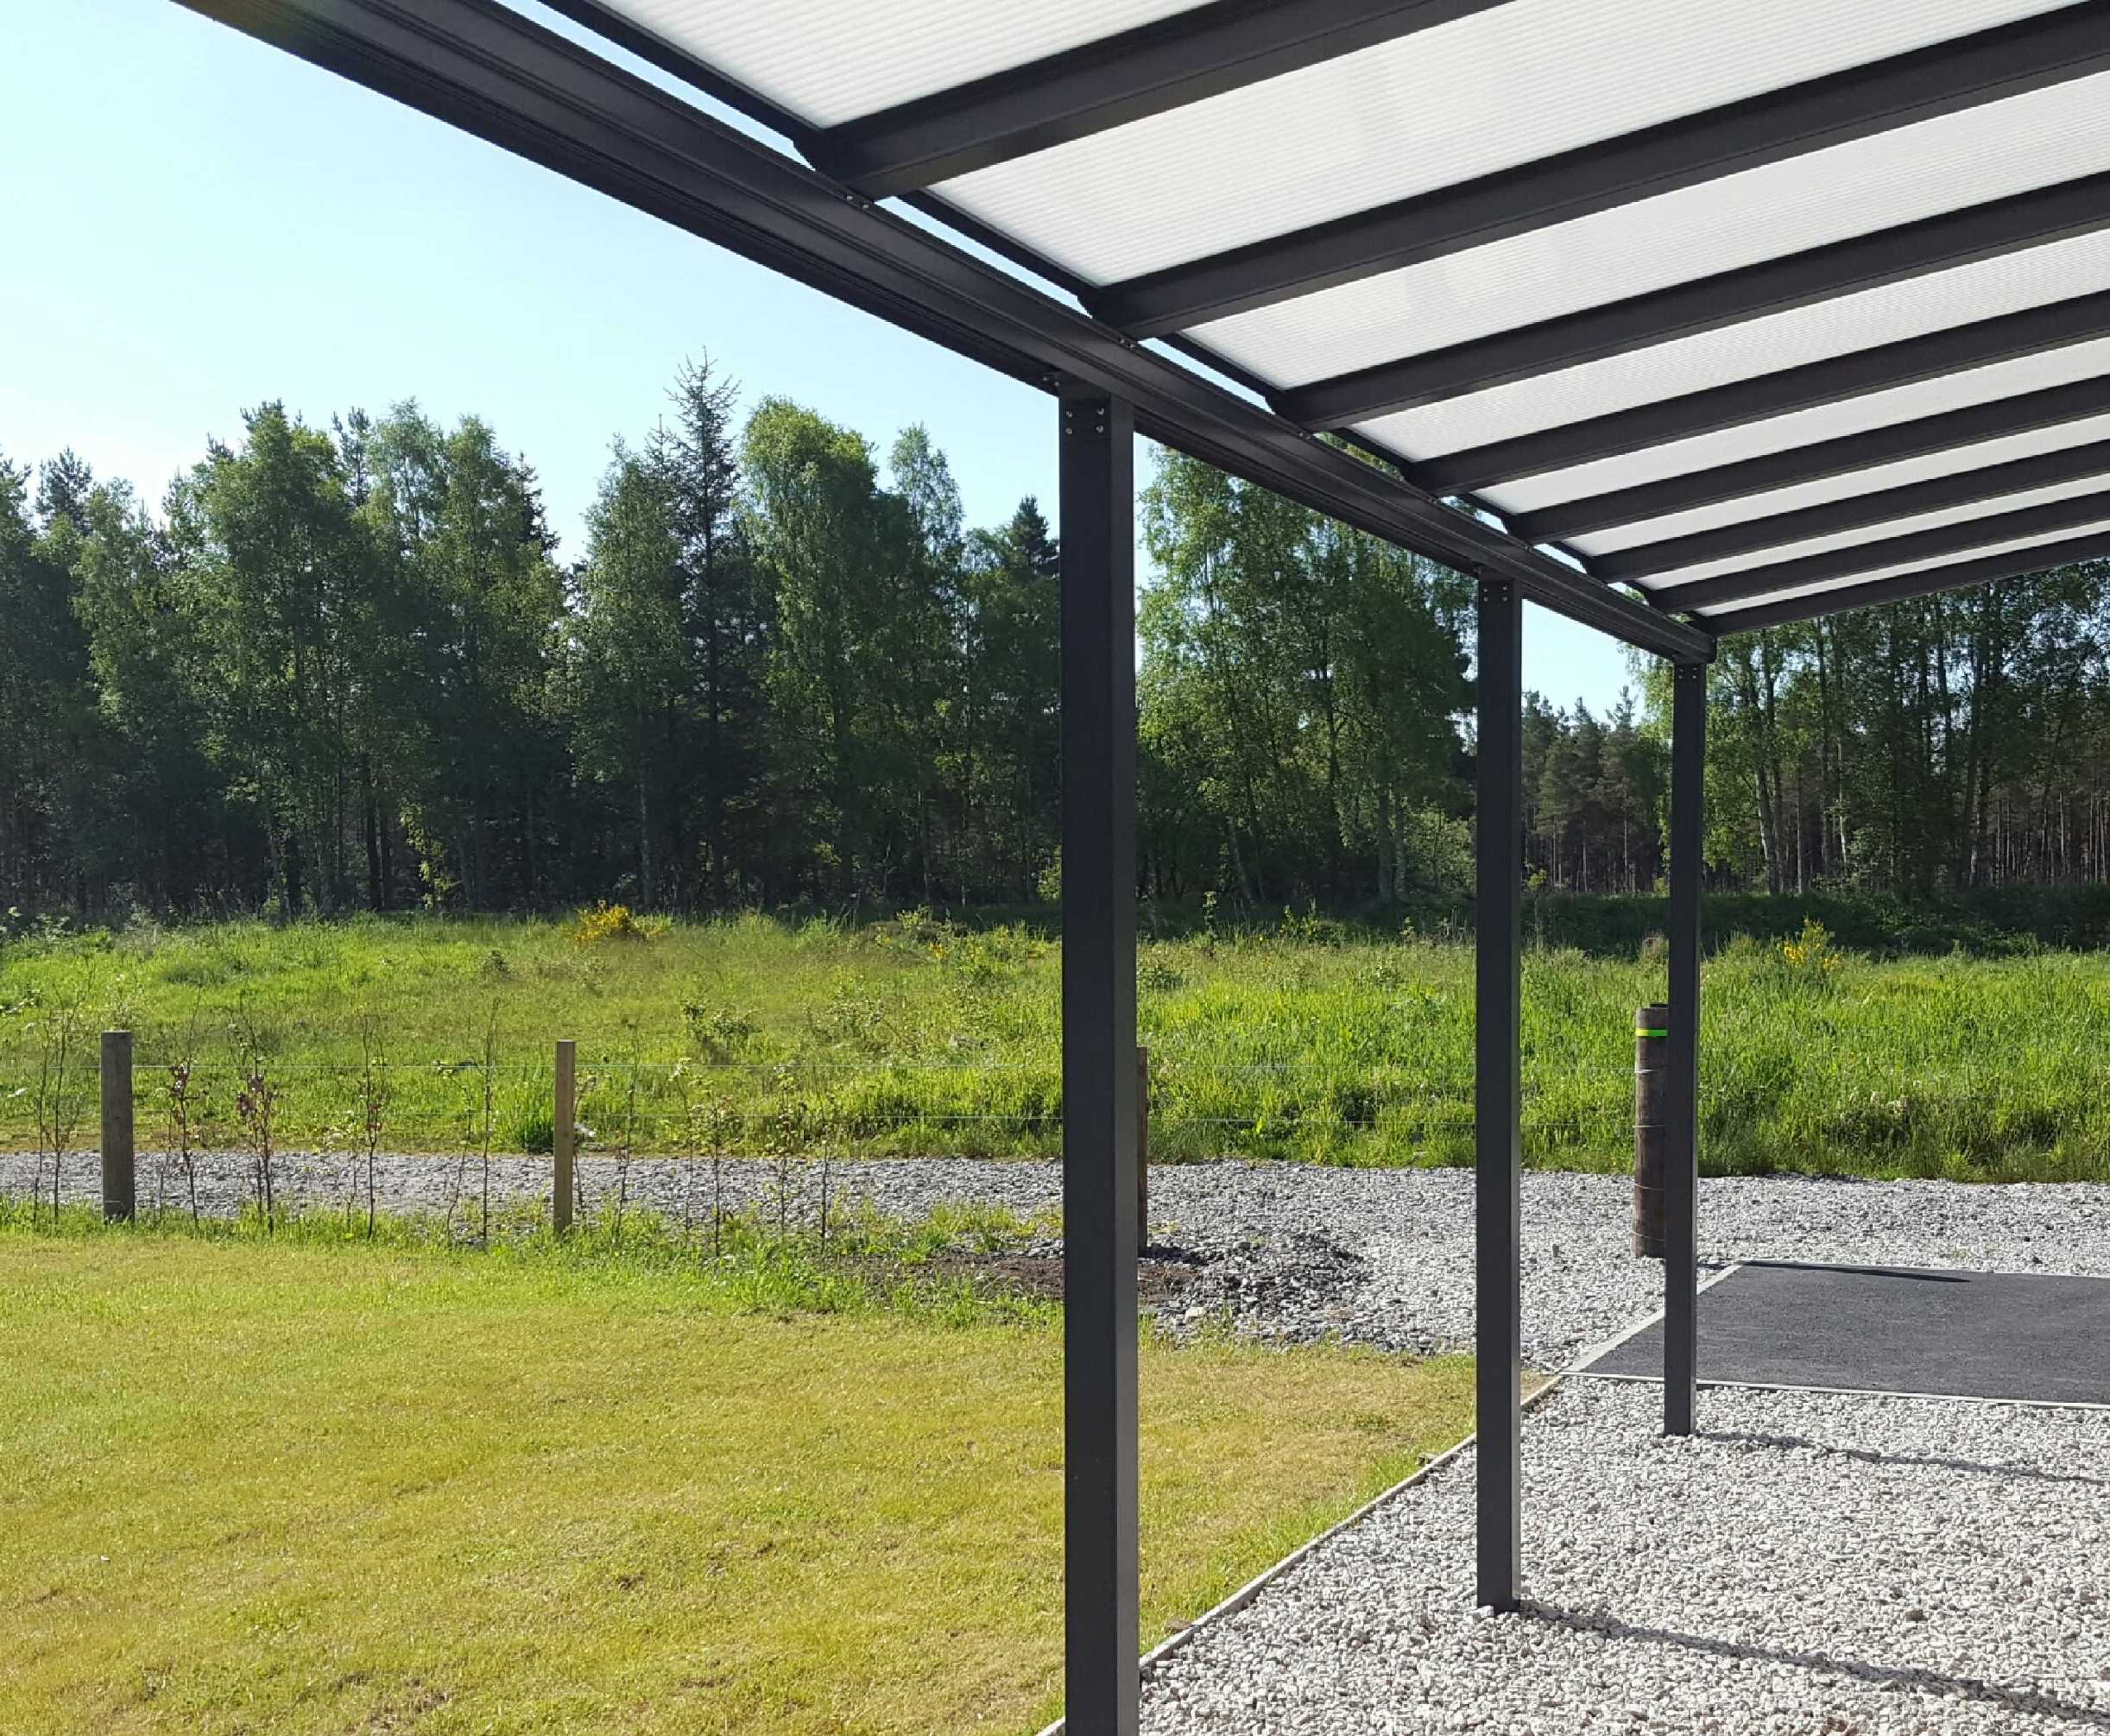 Omega Smart Lean-To Canopy, Anthracite Grey, 6mm Glass Clear Plate Polycarbonate Glazing - 4.2m (W) x 1.5m (P), (3) Supporting Posts